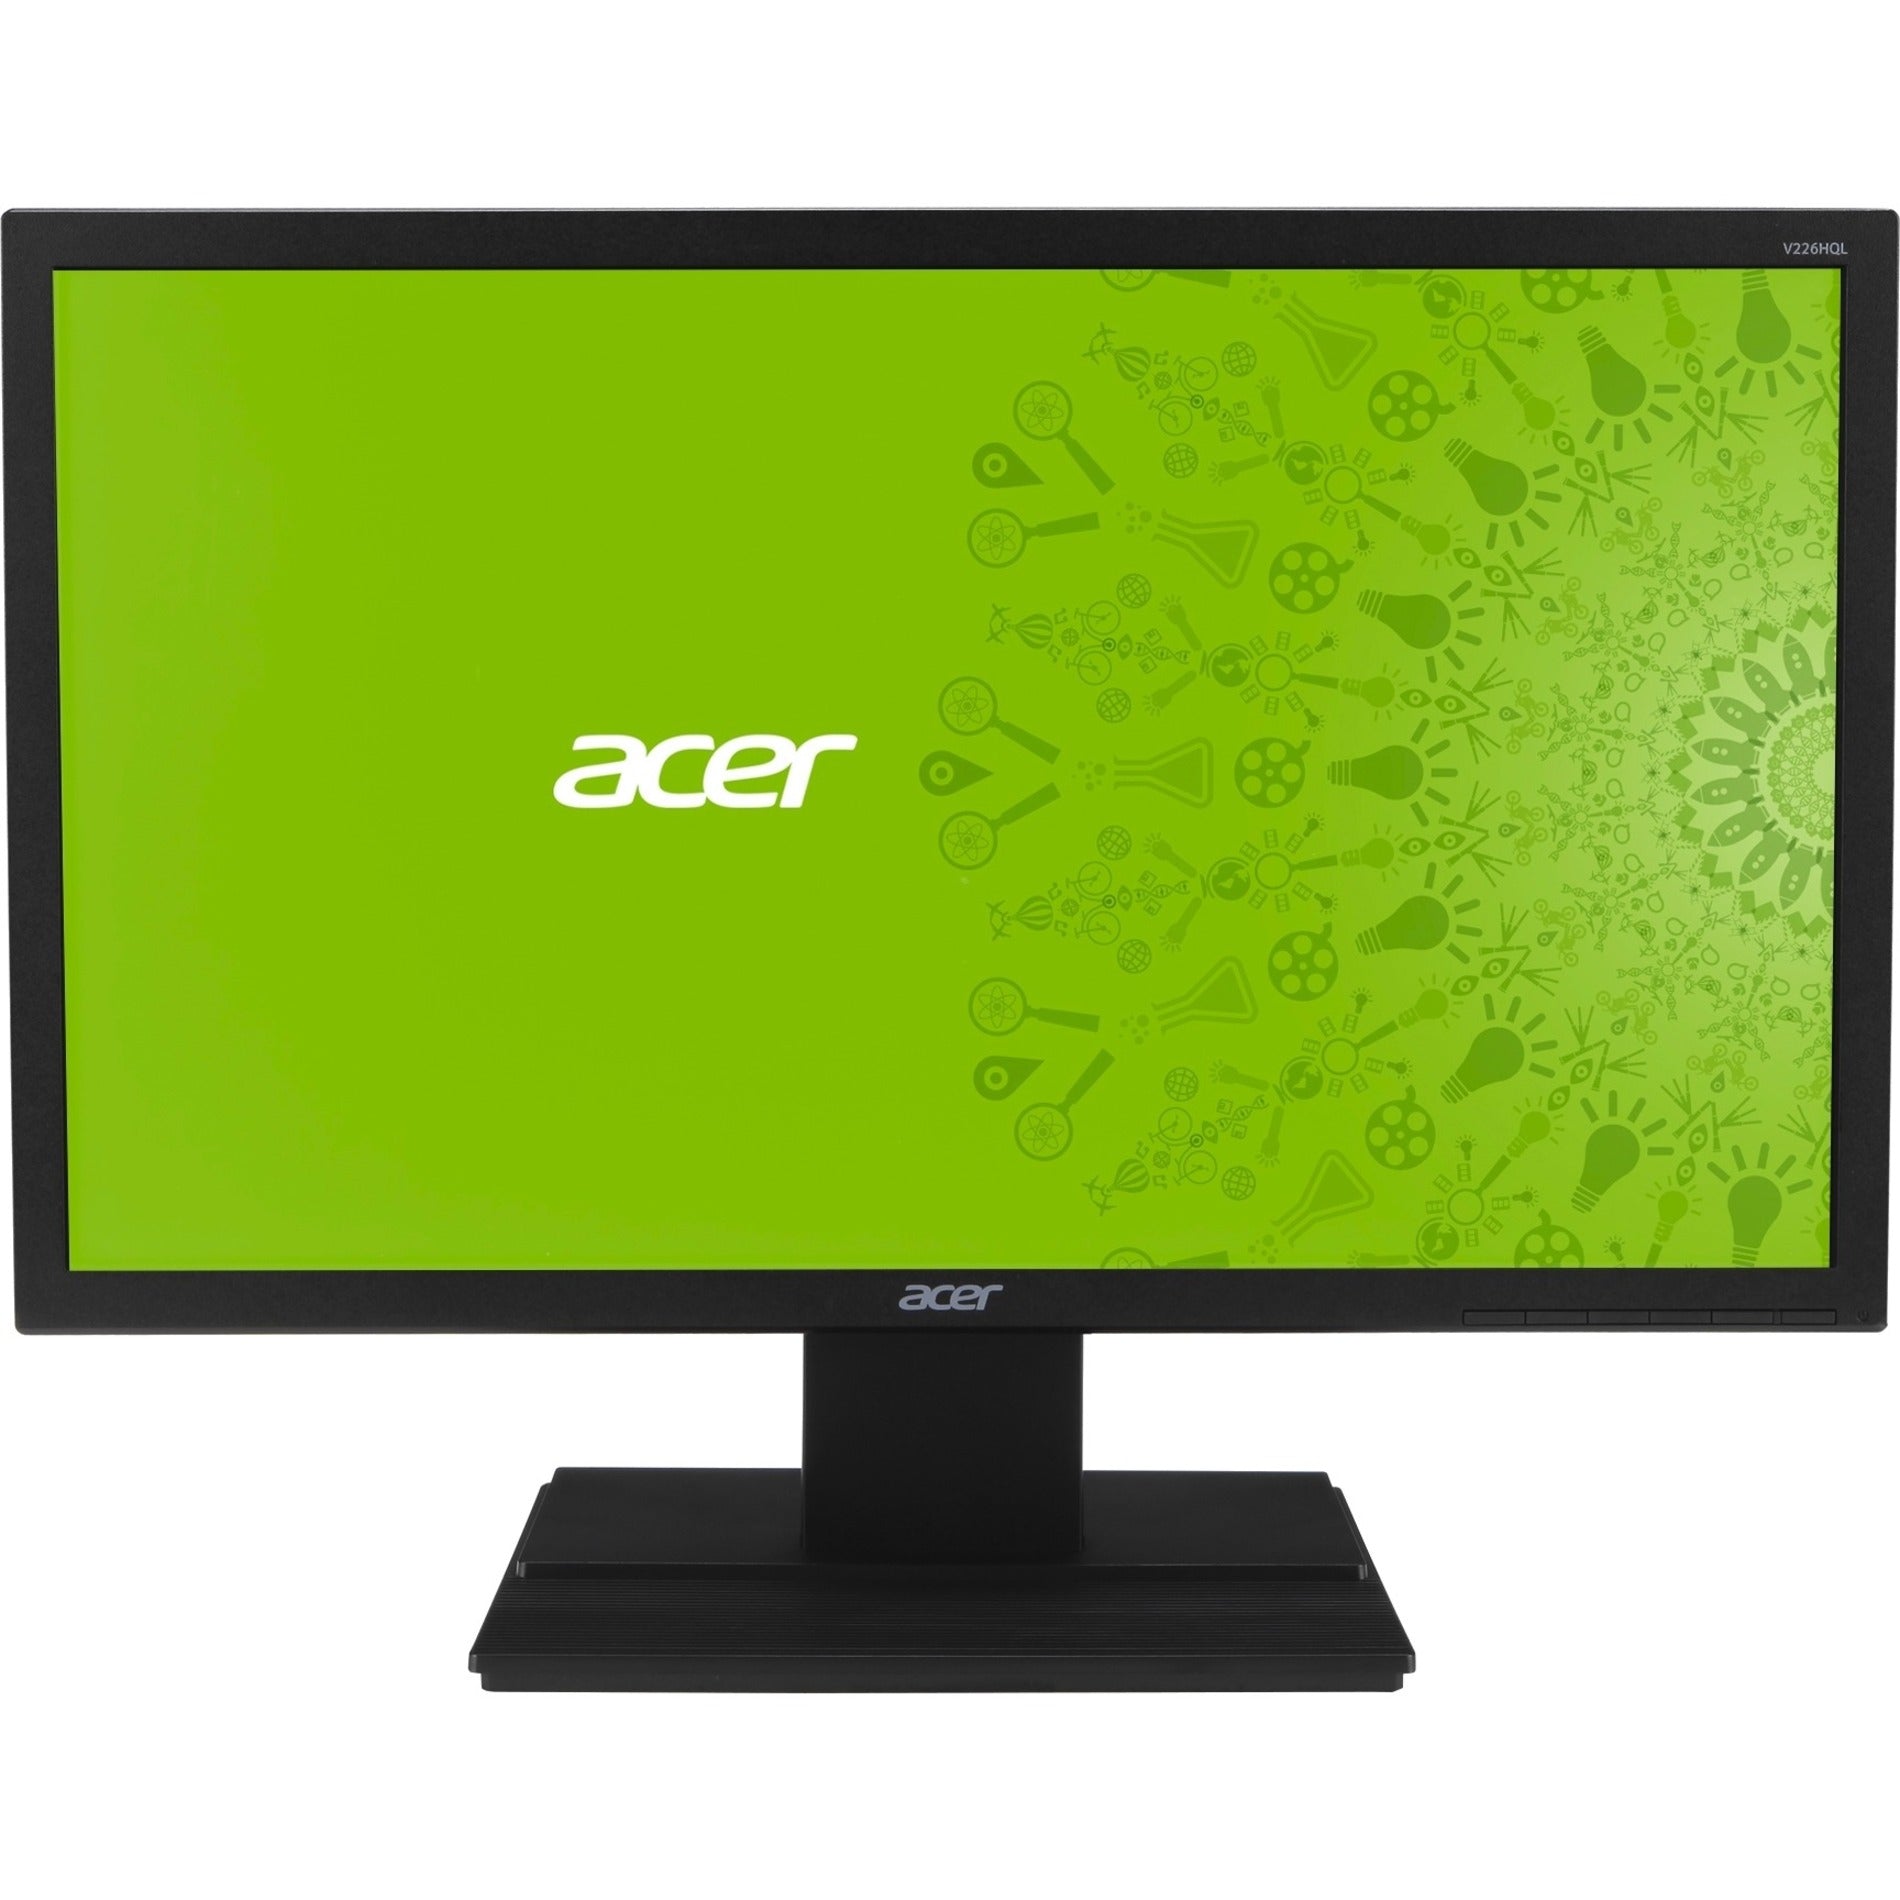 Acer UM.WV6AA.B01 V226HQL Widescreen LCD Monitor, 21.5 Full HD, 5ms Response Time, 100,000,000:1 Contrast Ratio